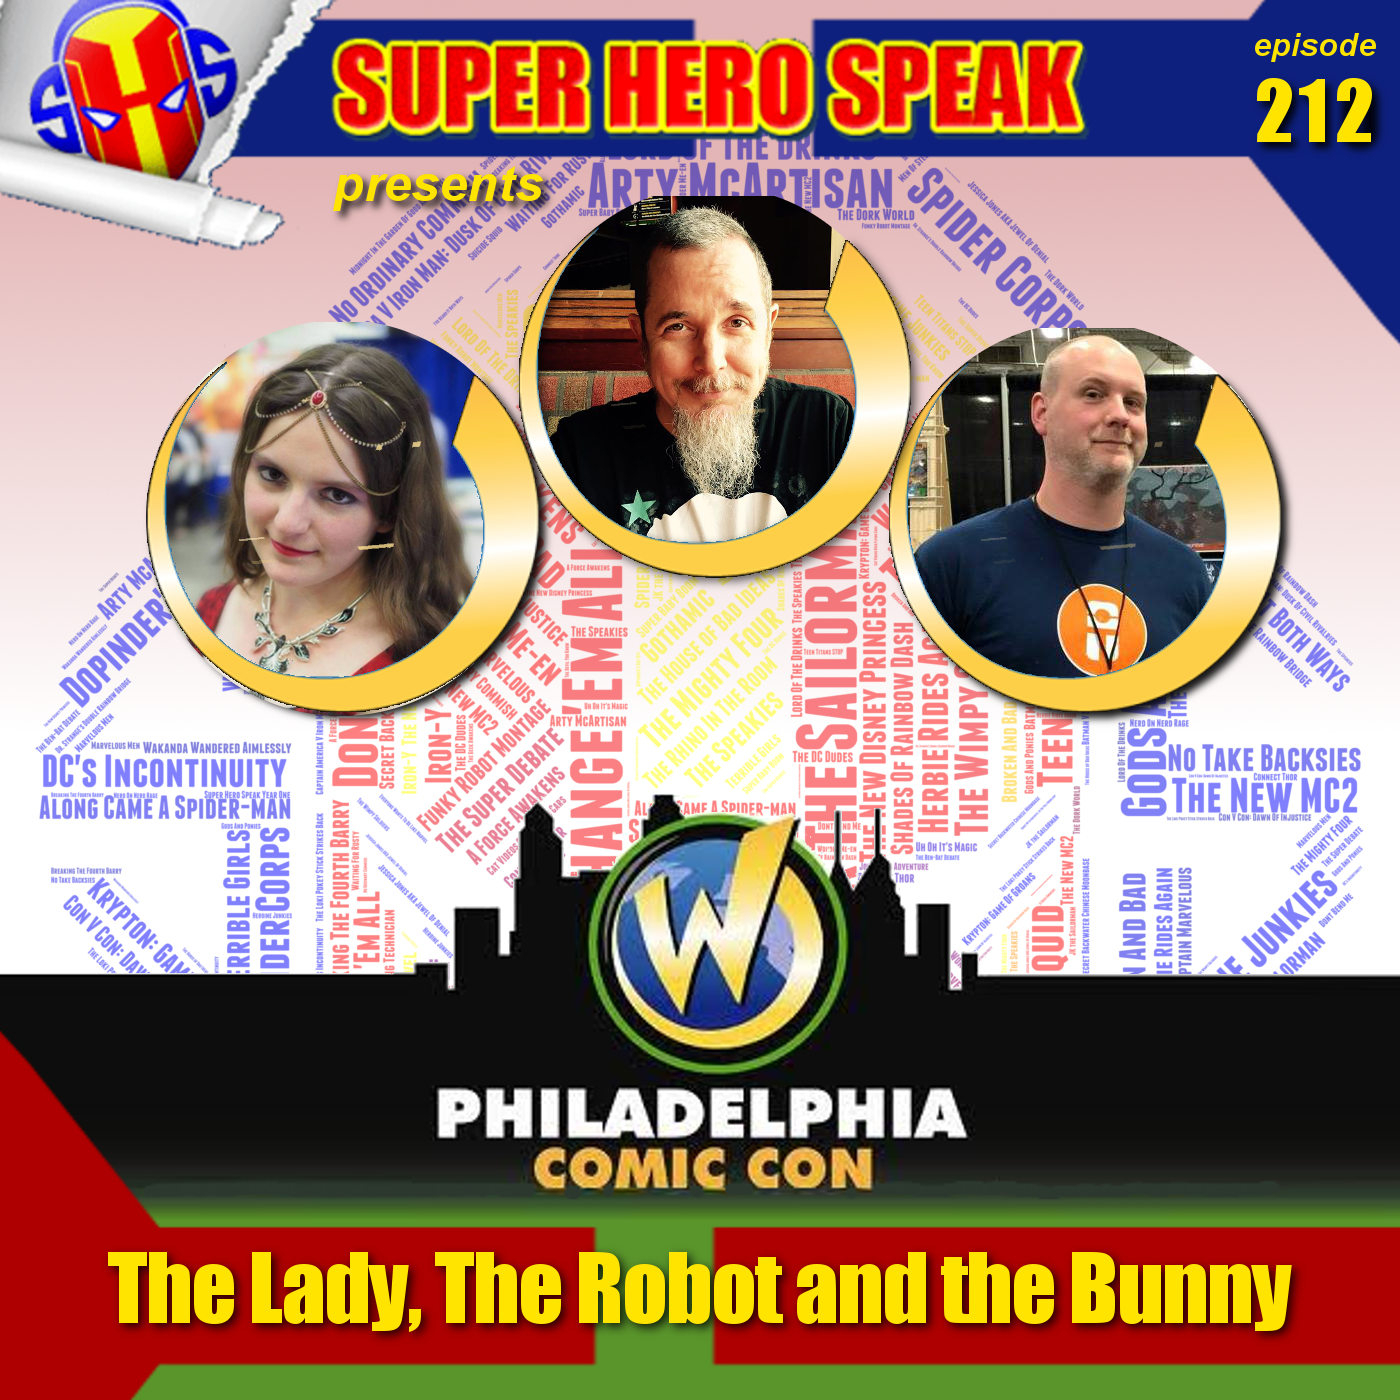 #212: The Lady, The Robot and the Bunny